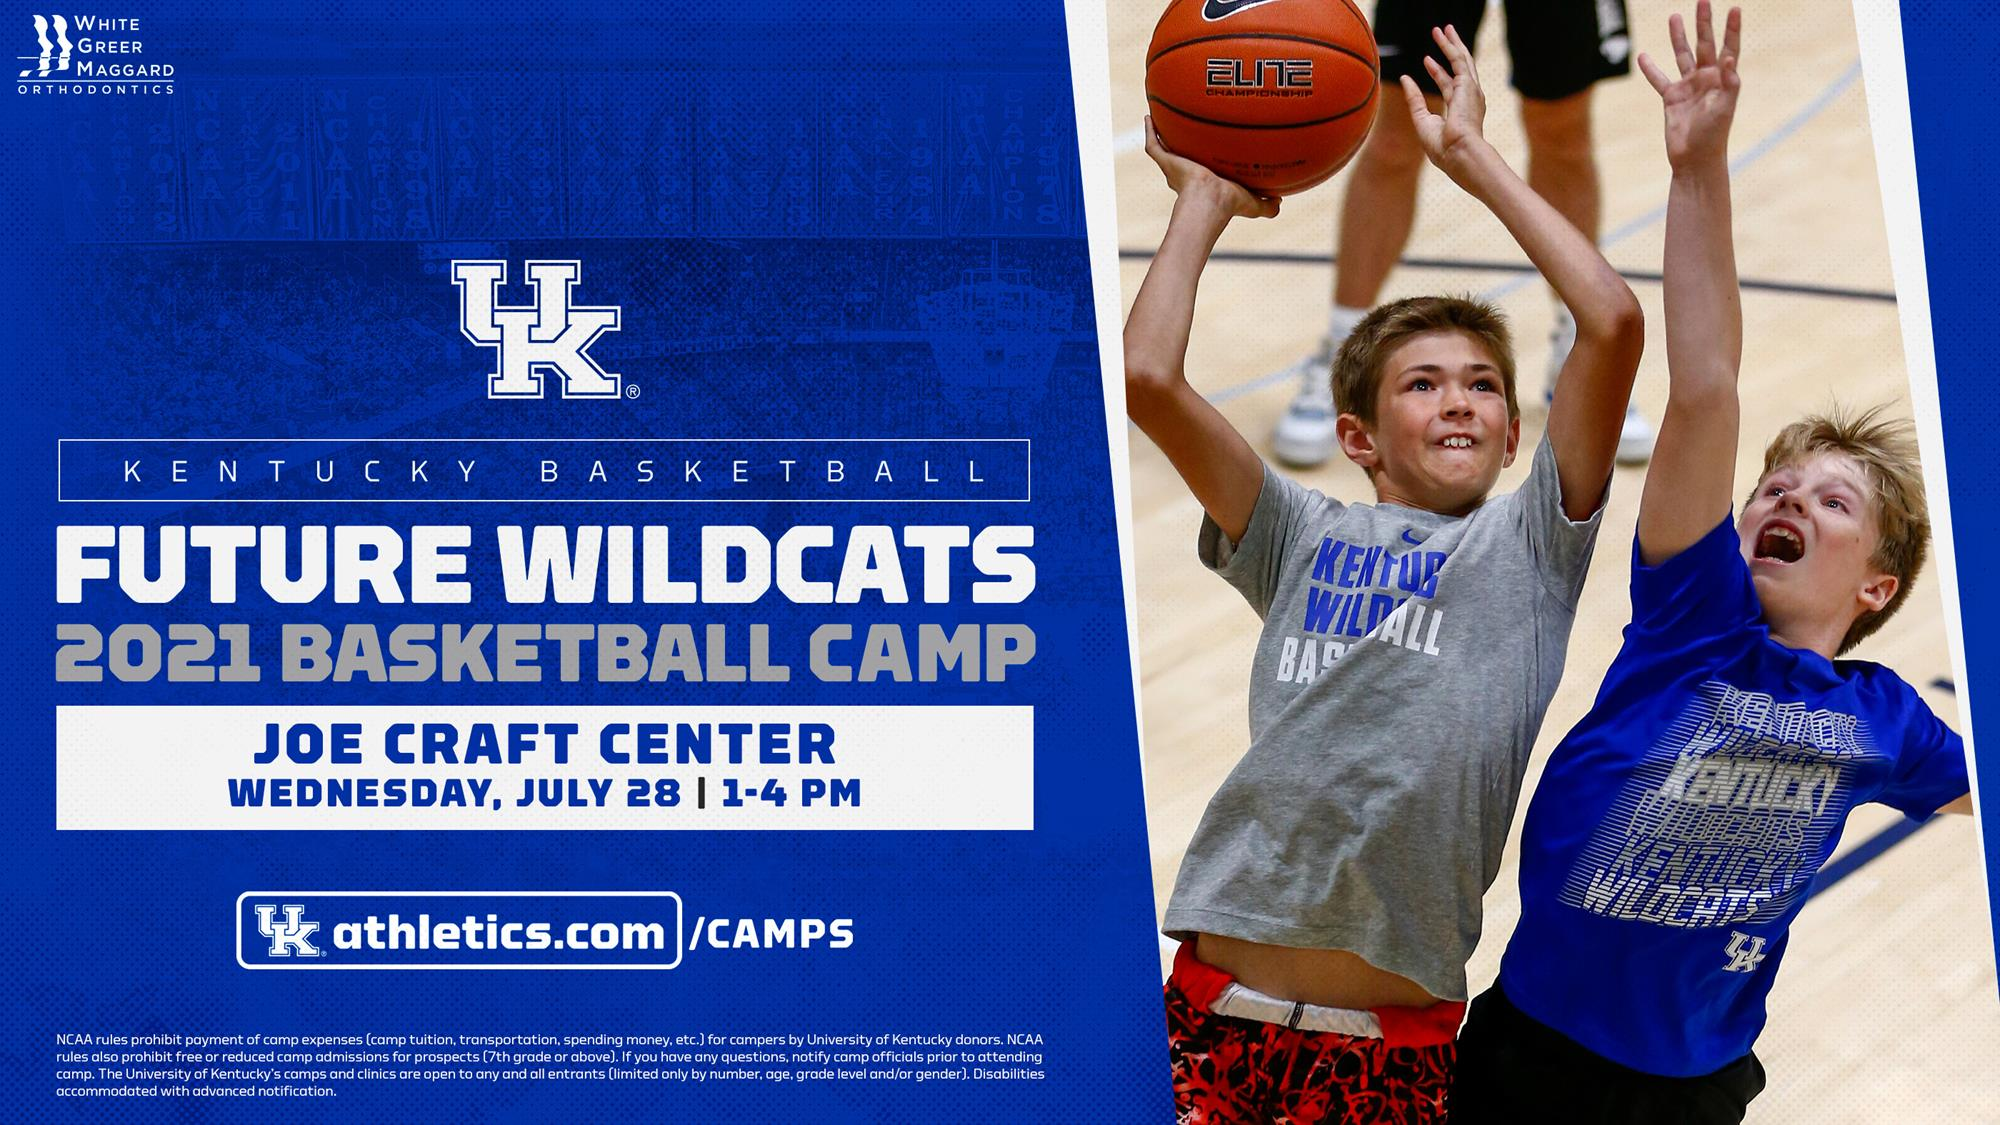 UK Men’s Basketball Adds Future Wildcats Camp on July 28